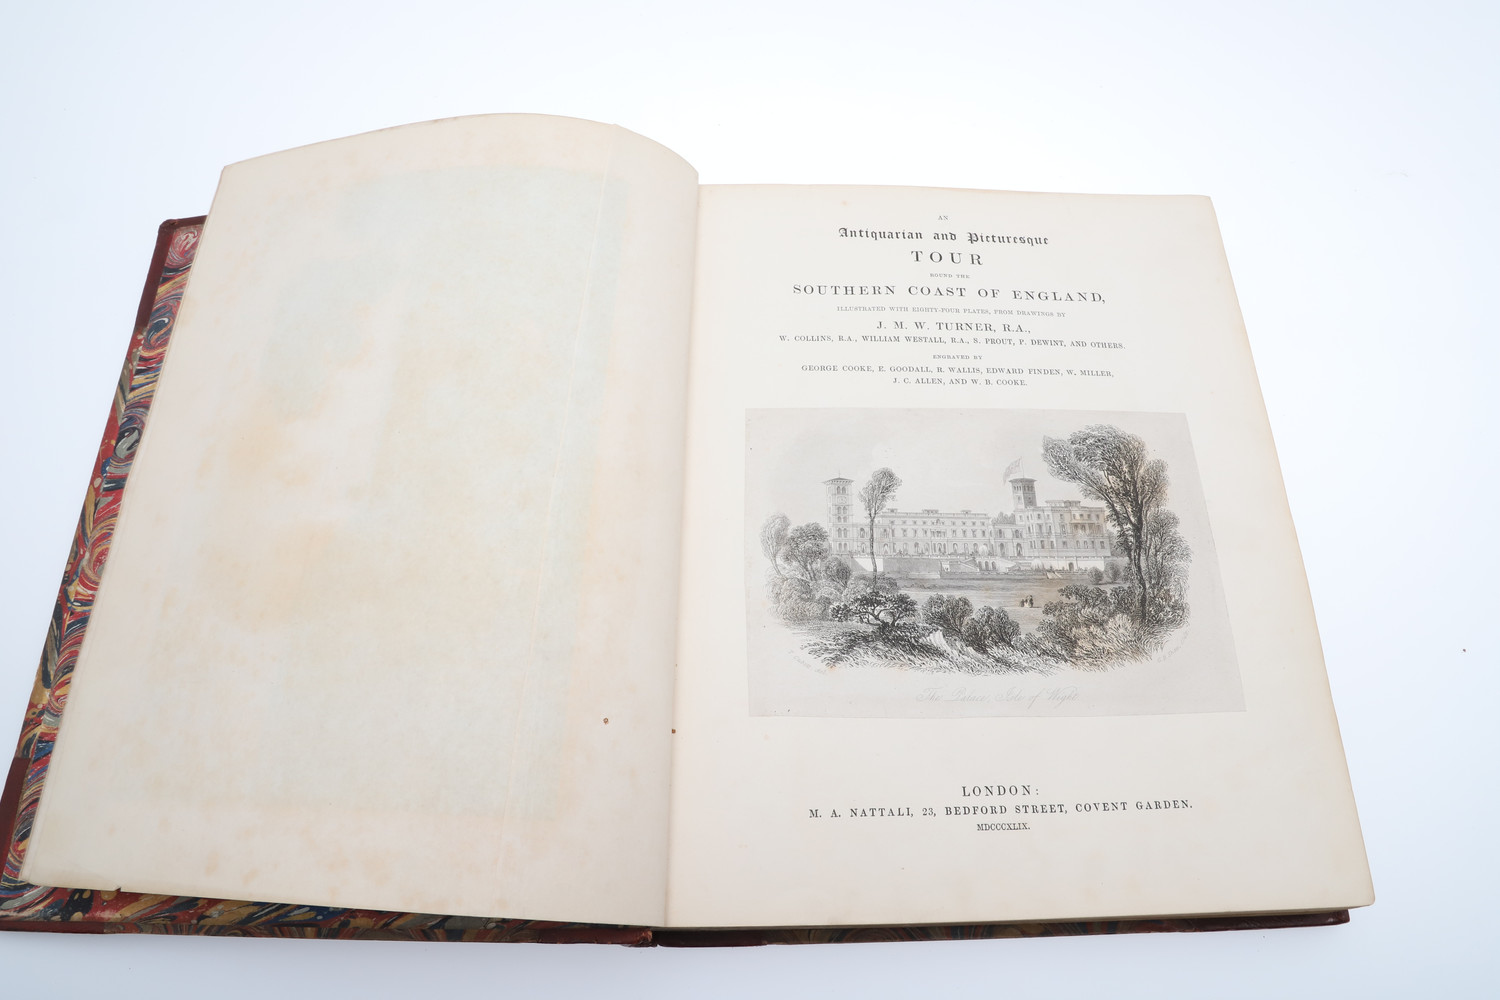 J.M.W. TURNER. An Antiquarian and Picturesque Tour Round the Southern Coast of England, 1849. - Image 3 of 6